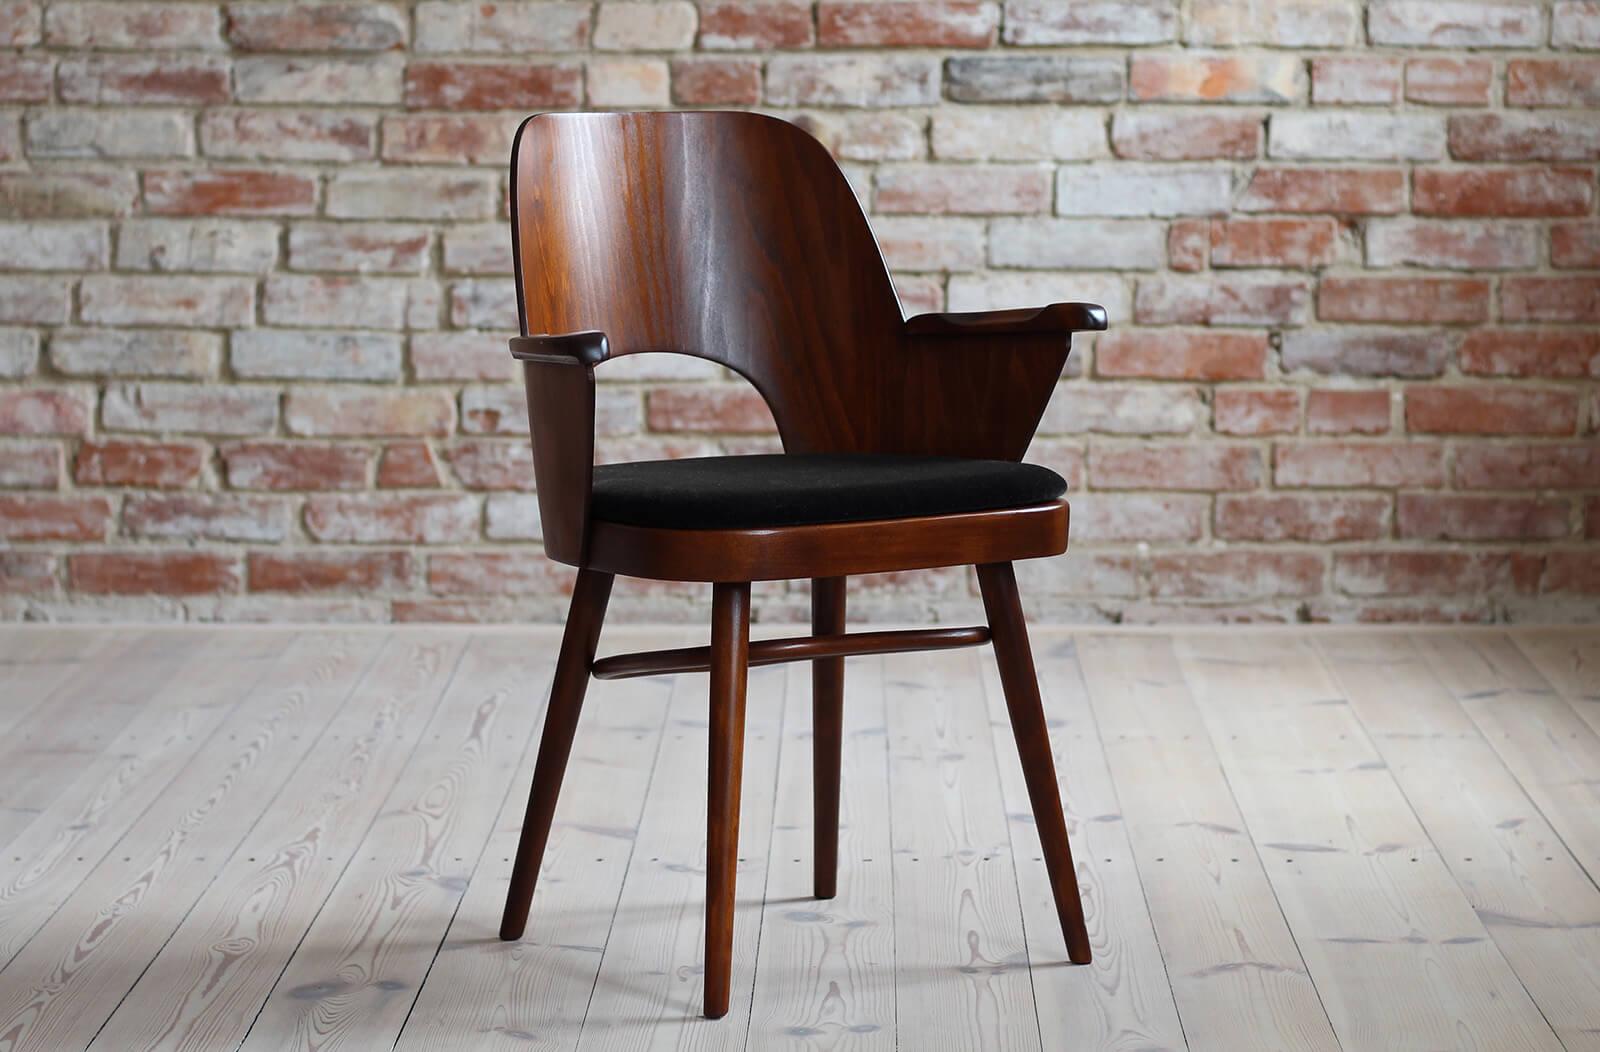 Set of 4 Midcentury Dining Chairs by L. Hofmann, Reupholstered in Kvadrat Fabric 1